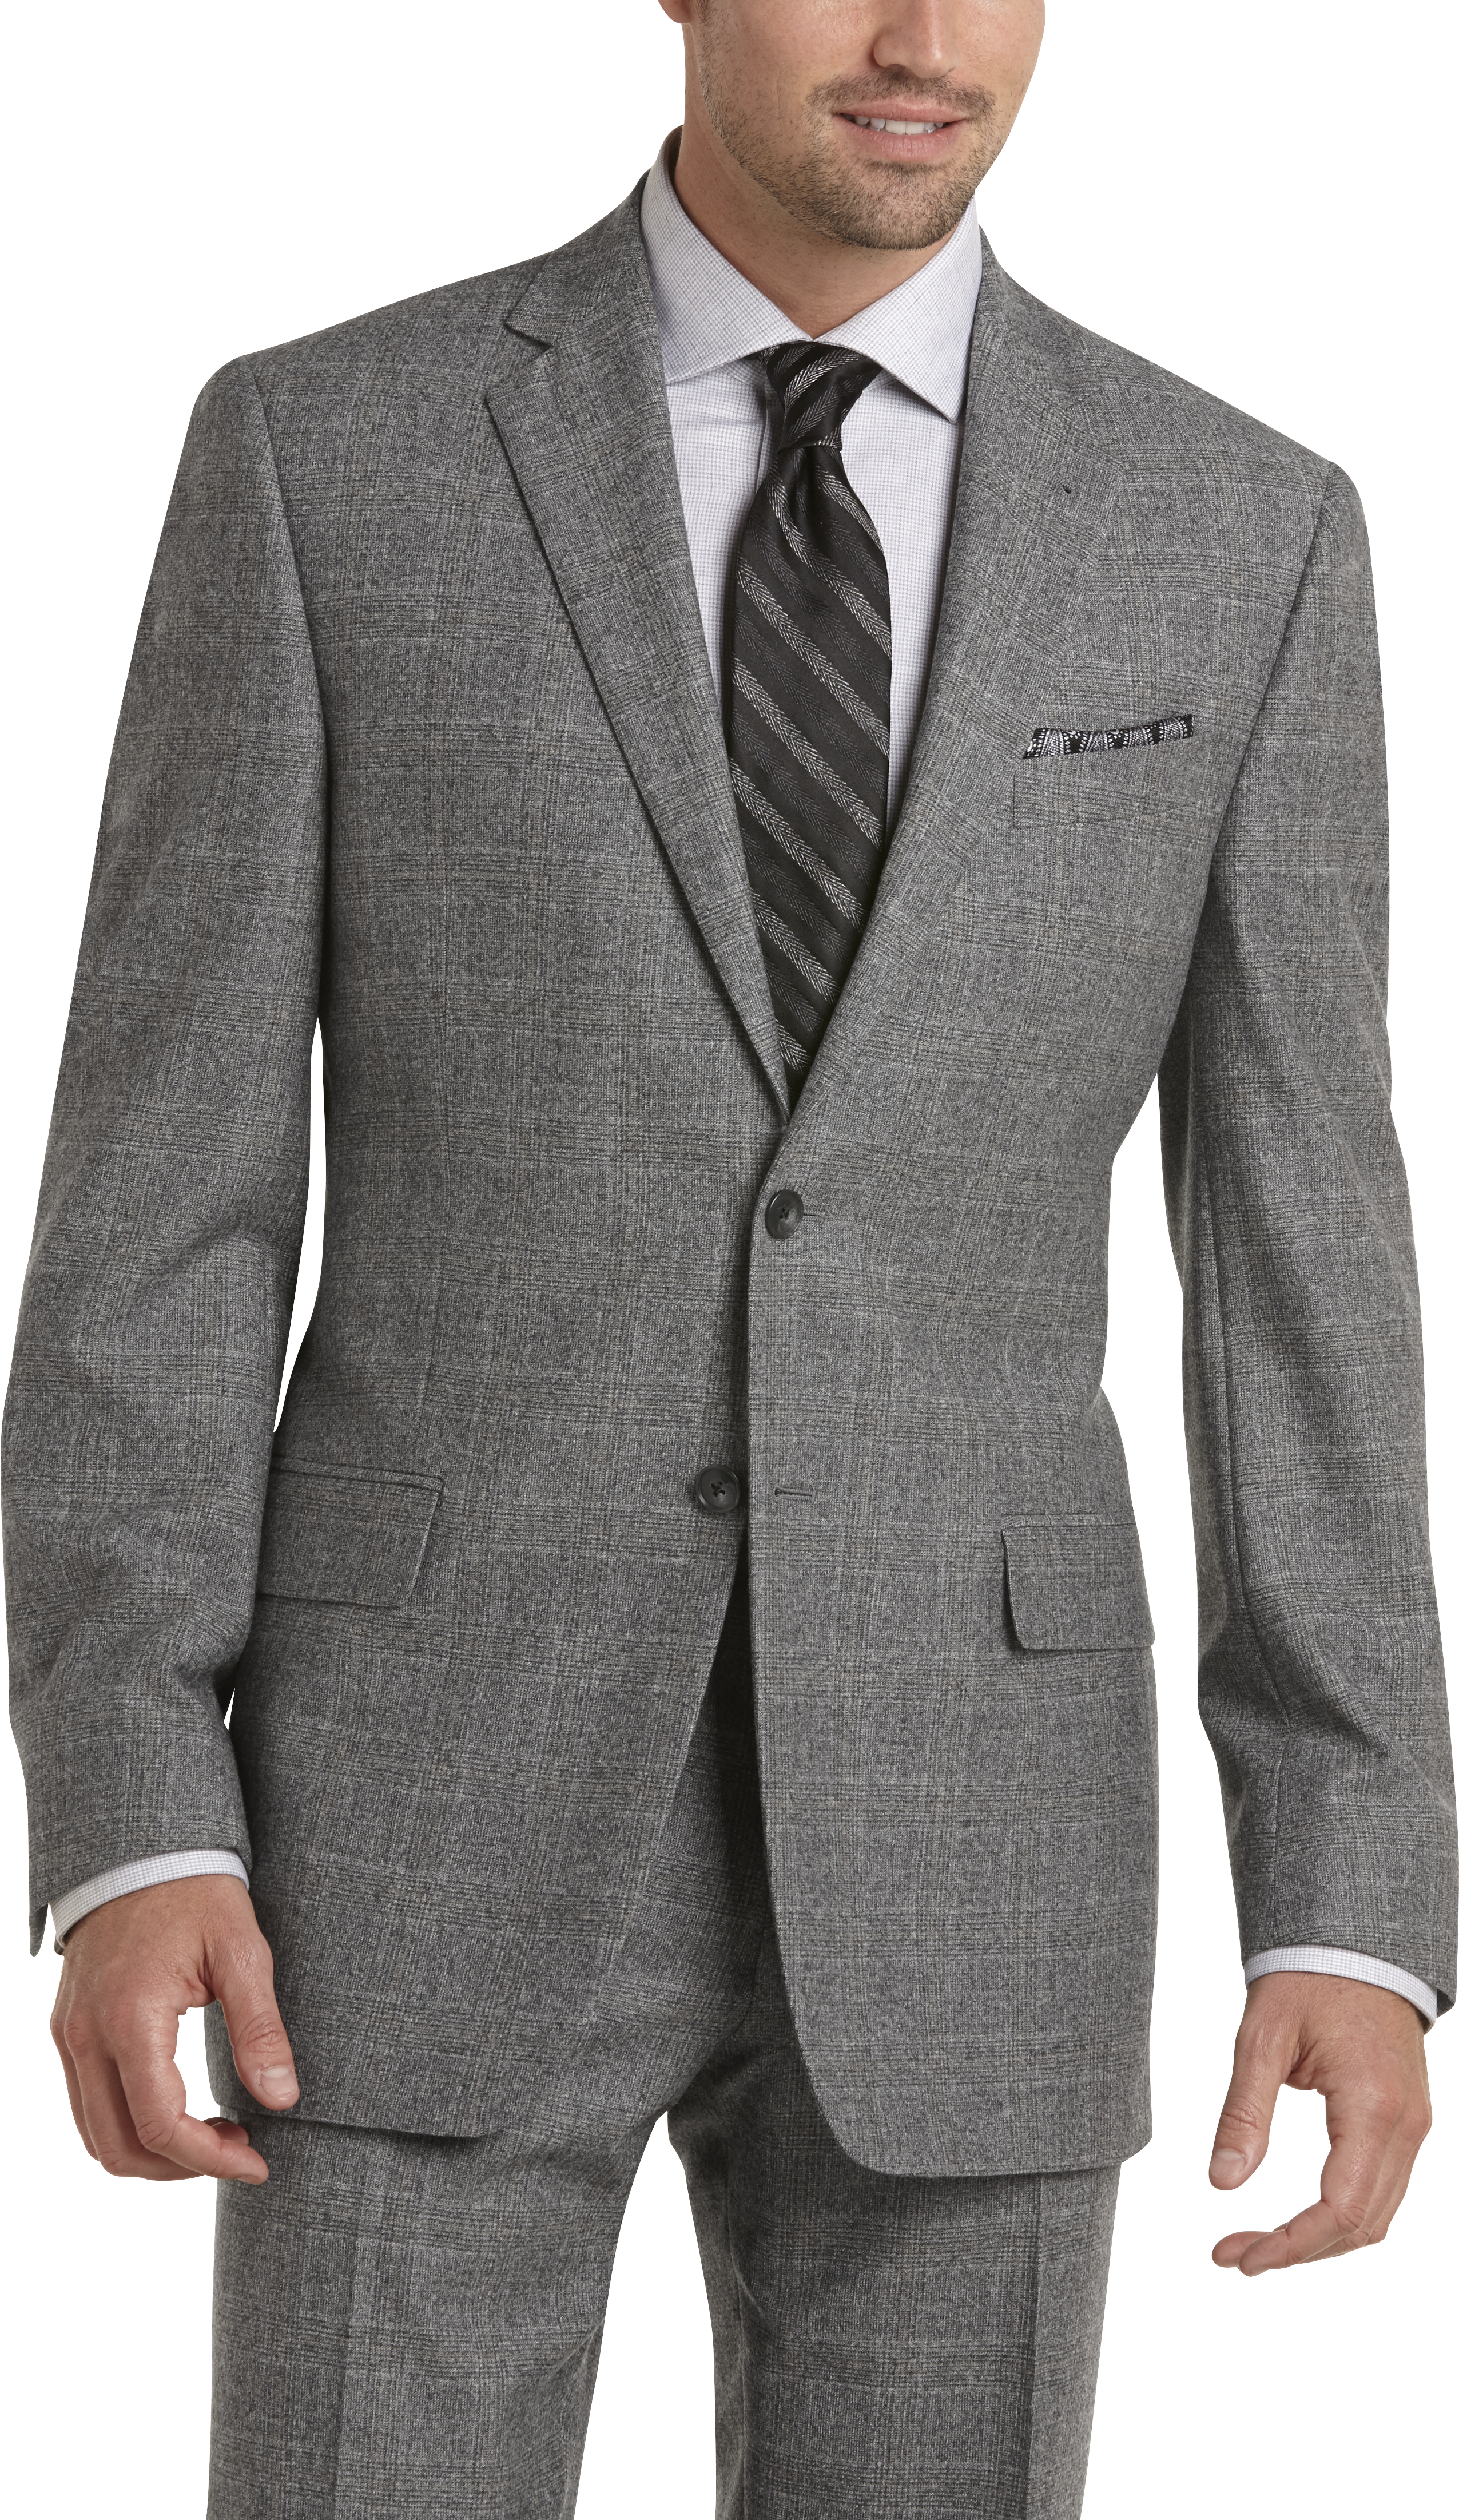 Suits - Clearance | Men's Wearhouse